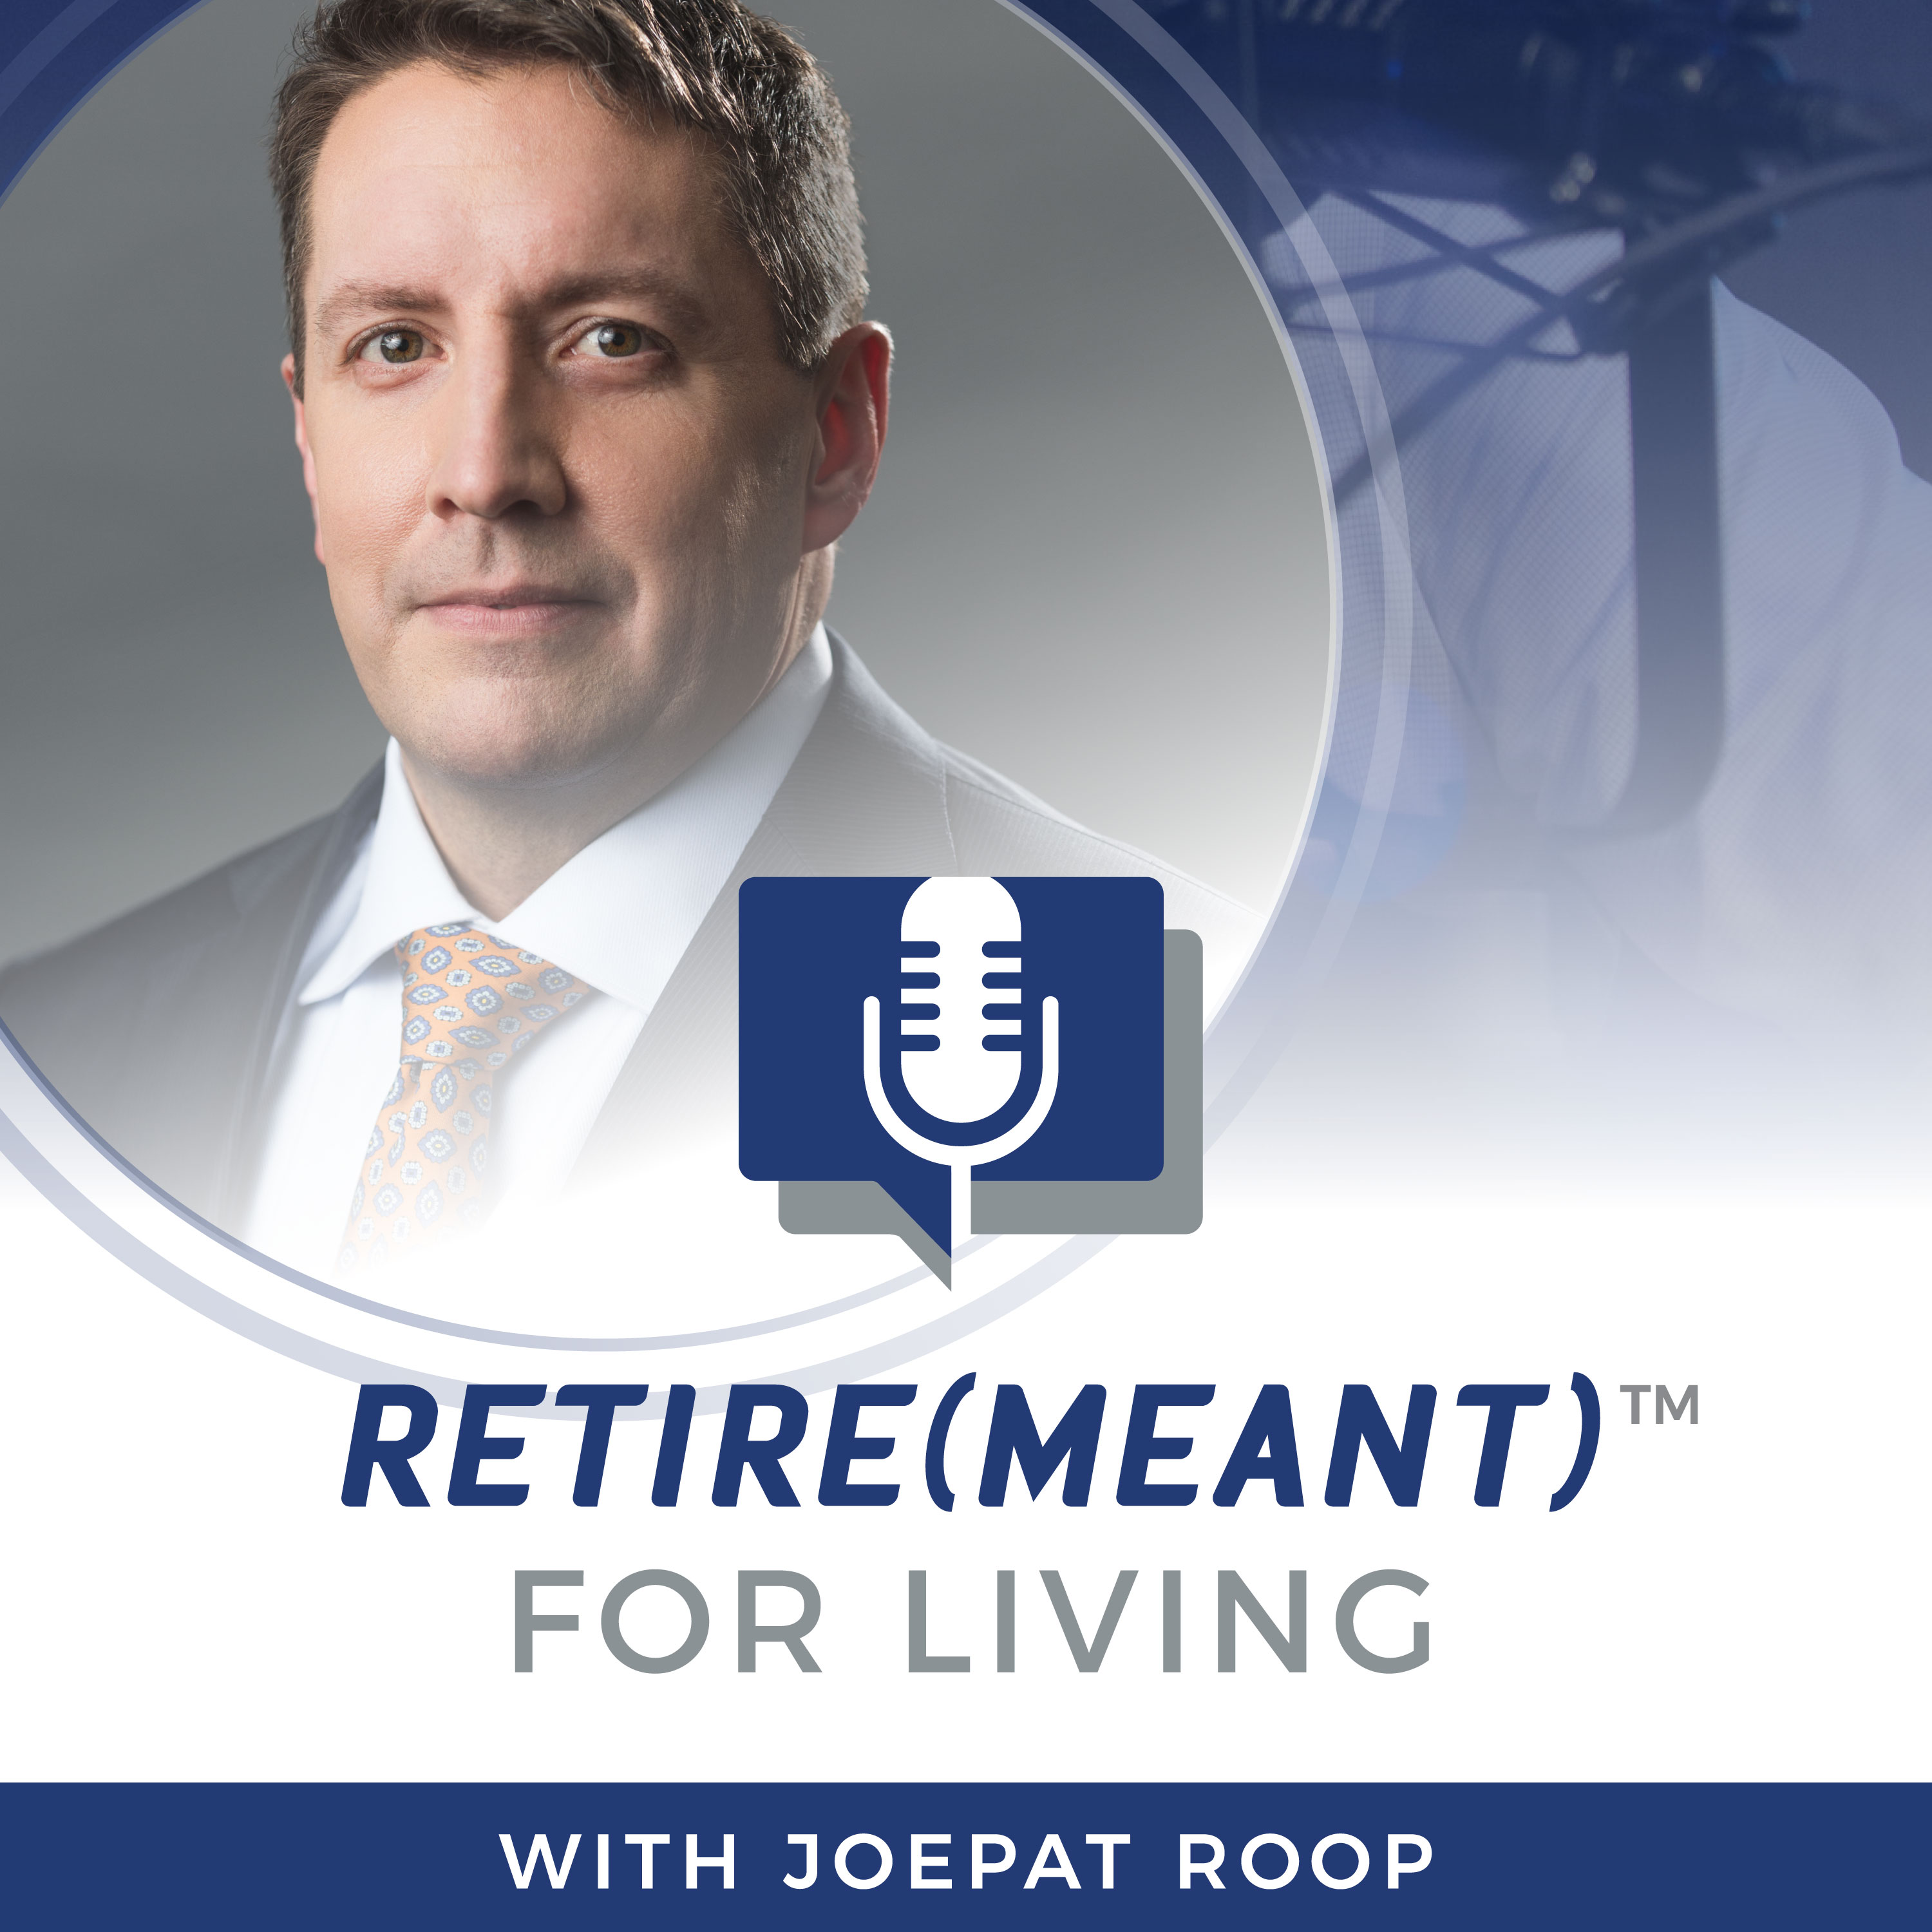 Time to Eliminate Your 401(k)?